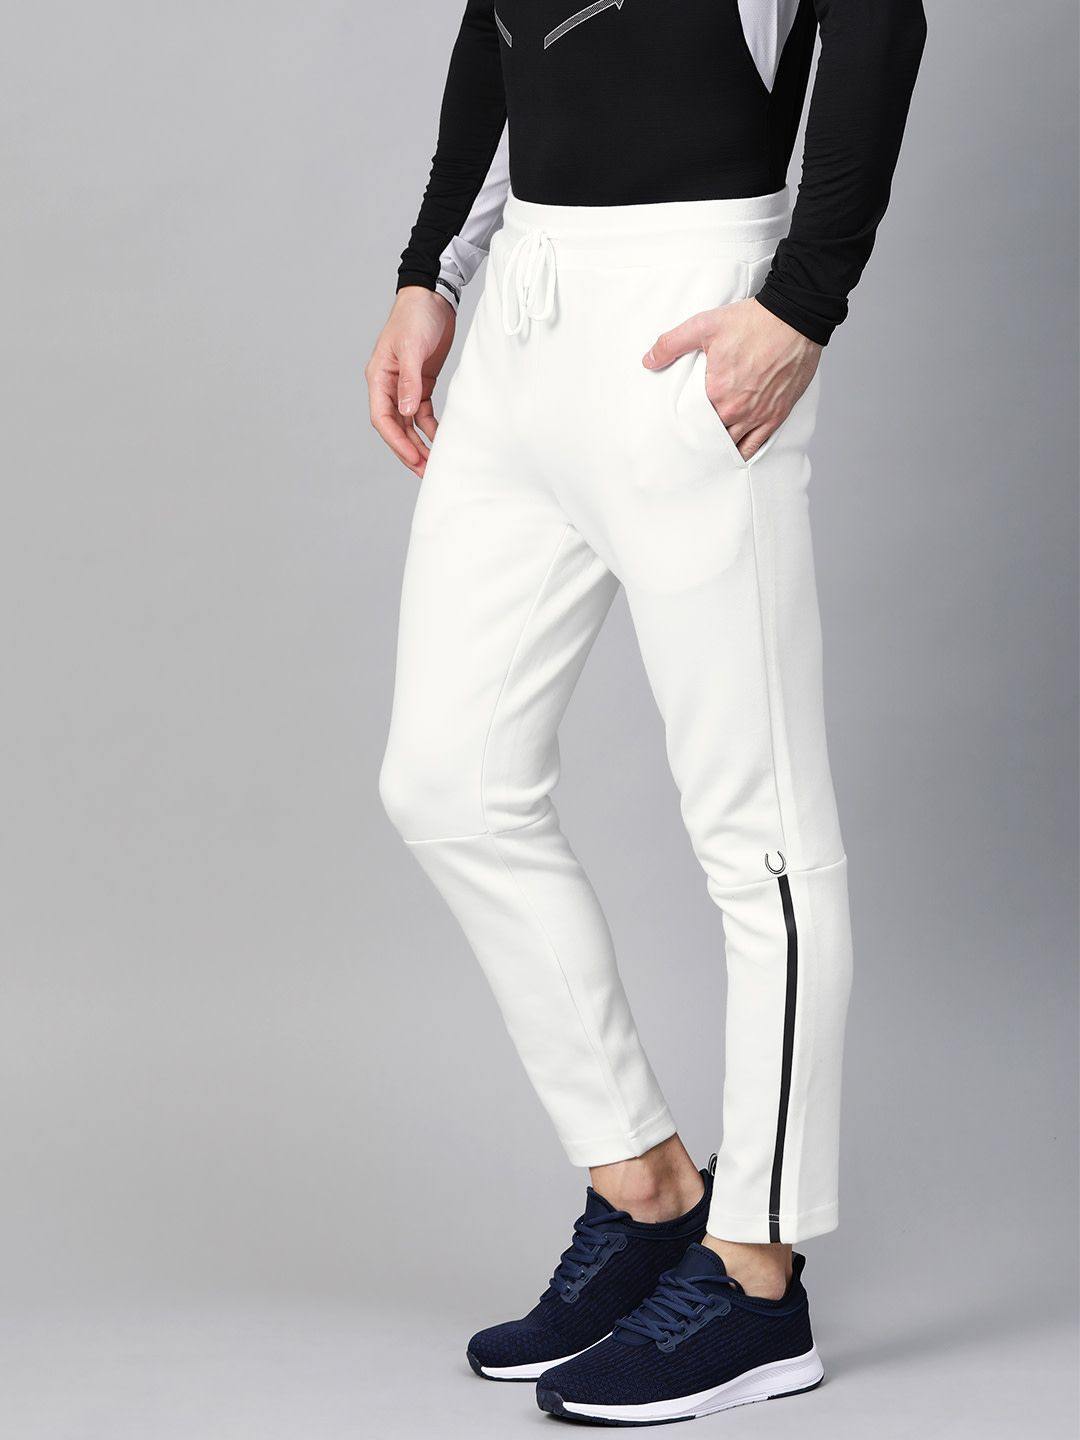 Buy SQUARE Men's Narrow Fit Cotton Lycra Blend Casual Chino Trouser Pants  Ivory (1855/5) at Amazon.in